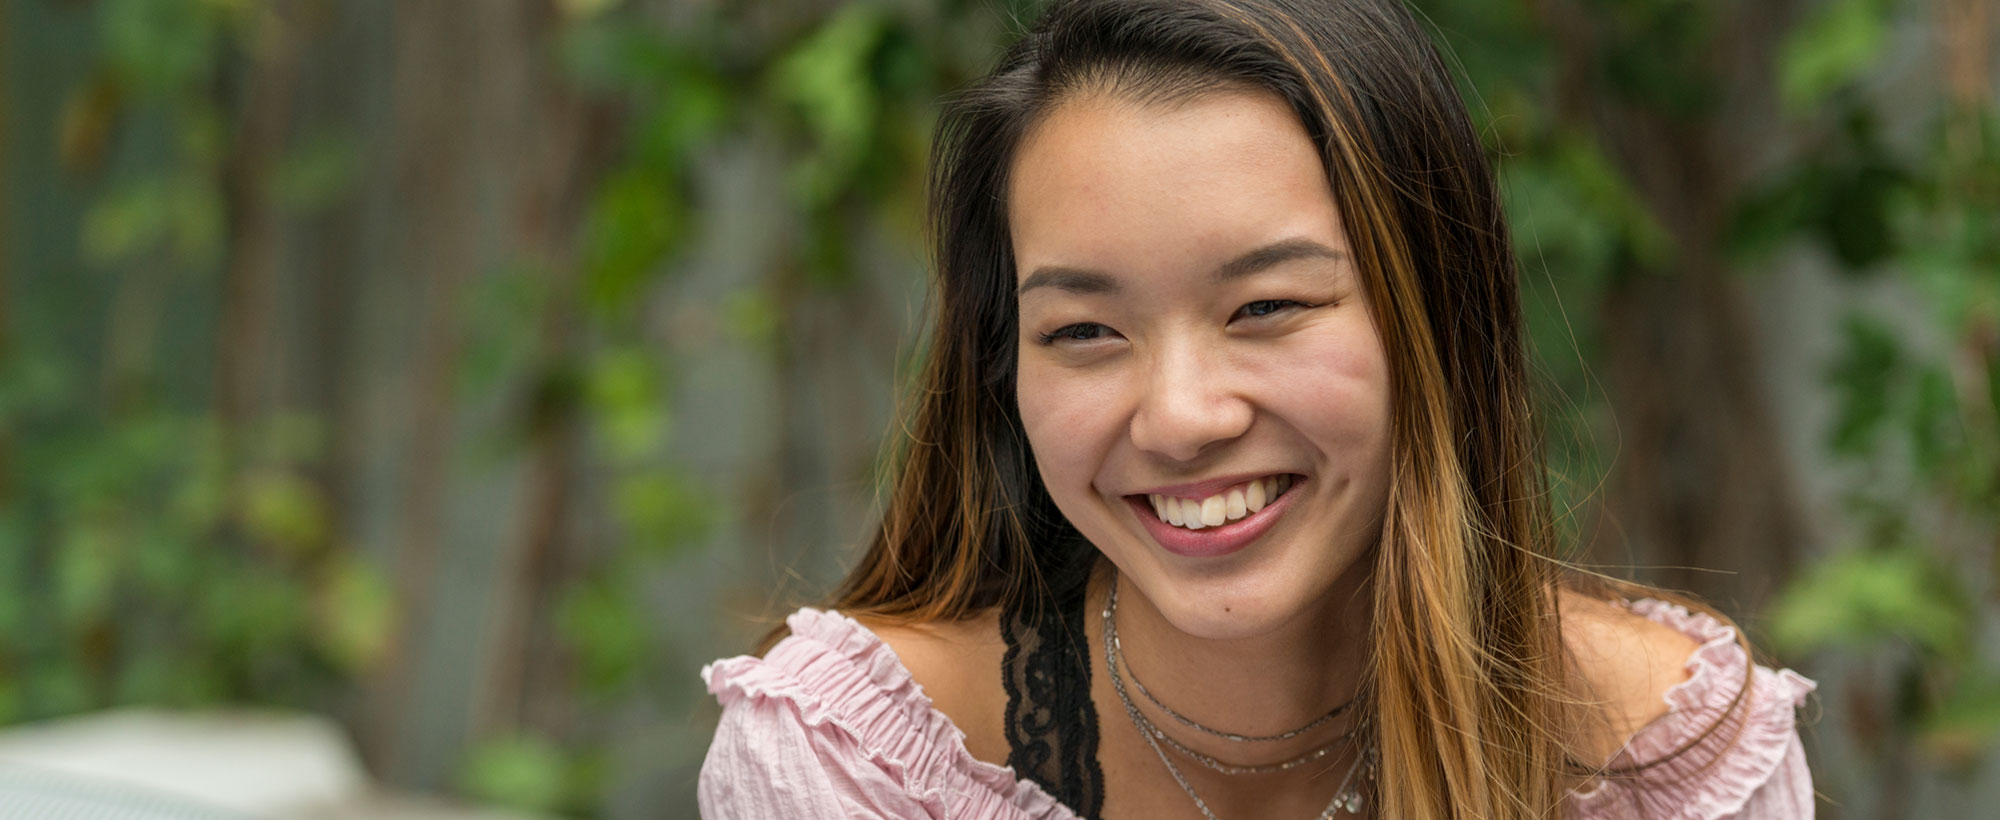 Farren Leung ’18 Iacocca International Internship, Executive Board of the International Business Club, Business Information Systems Club, Asian Culture Society Recipient of the Jack Barnett Scholarship since the fall of 2015